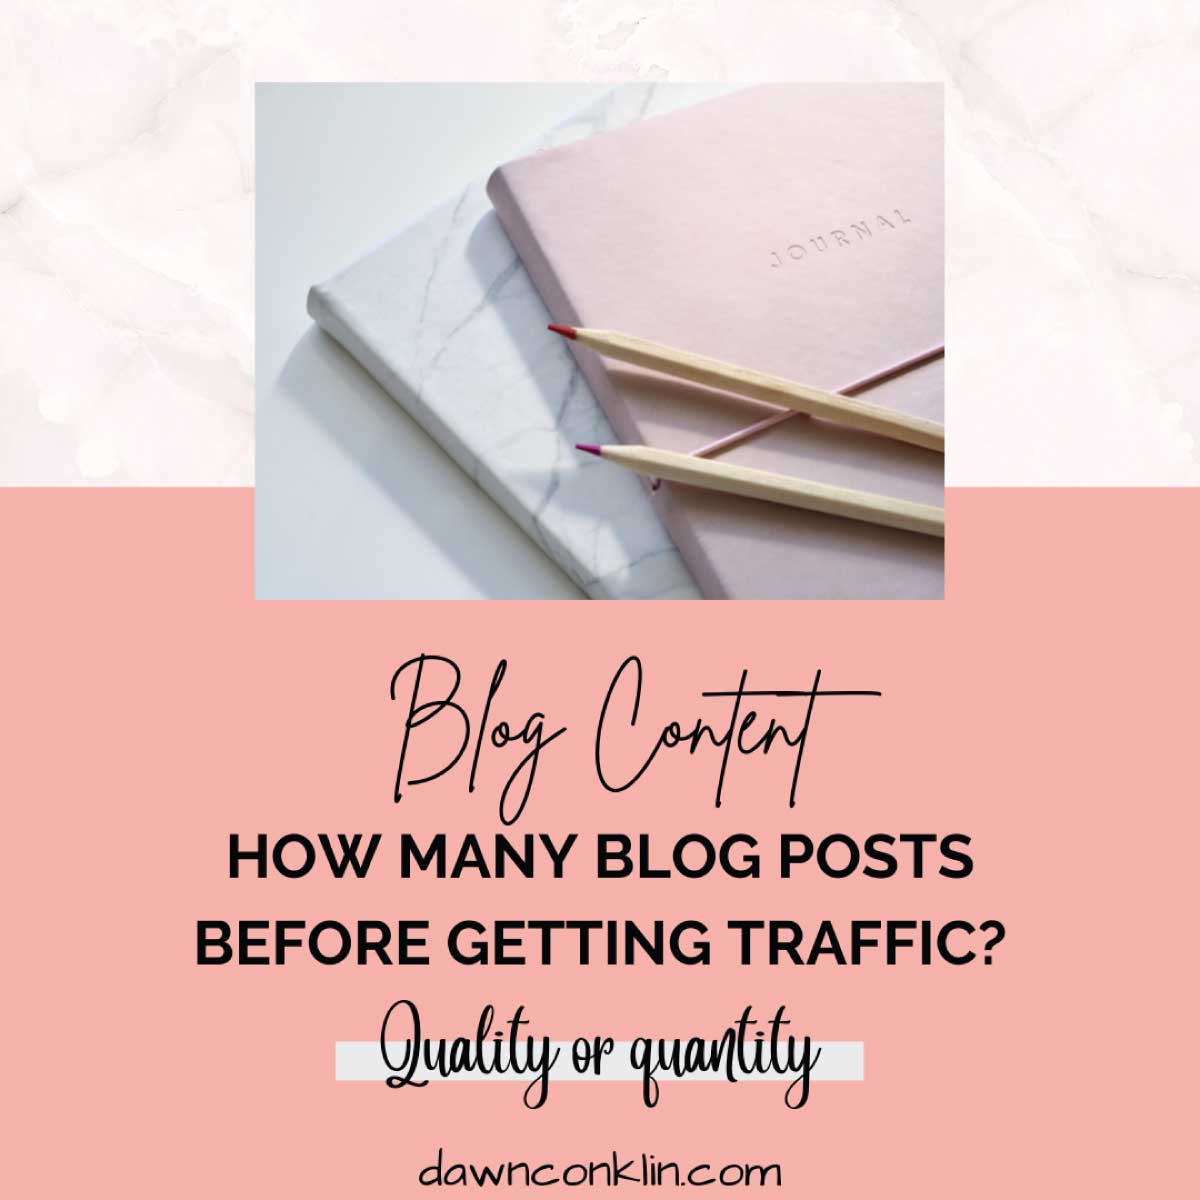 Blog Content - How many blog posts before getting traffic? Quality or quantity?